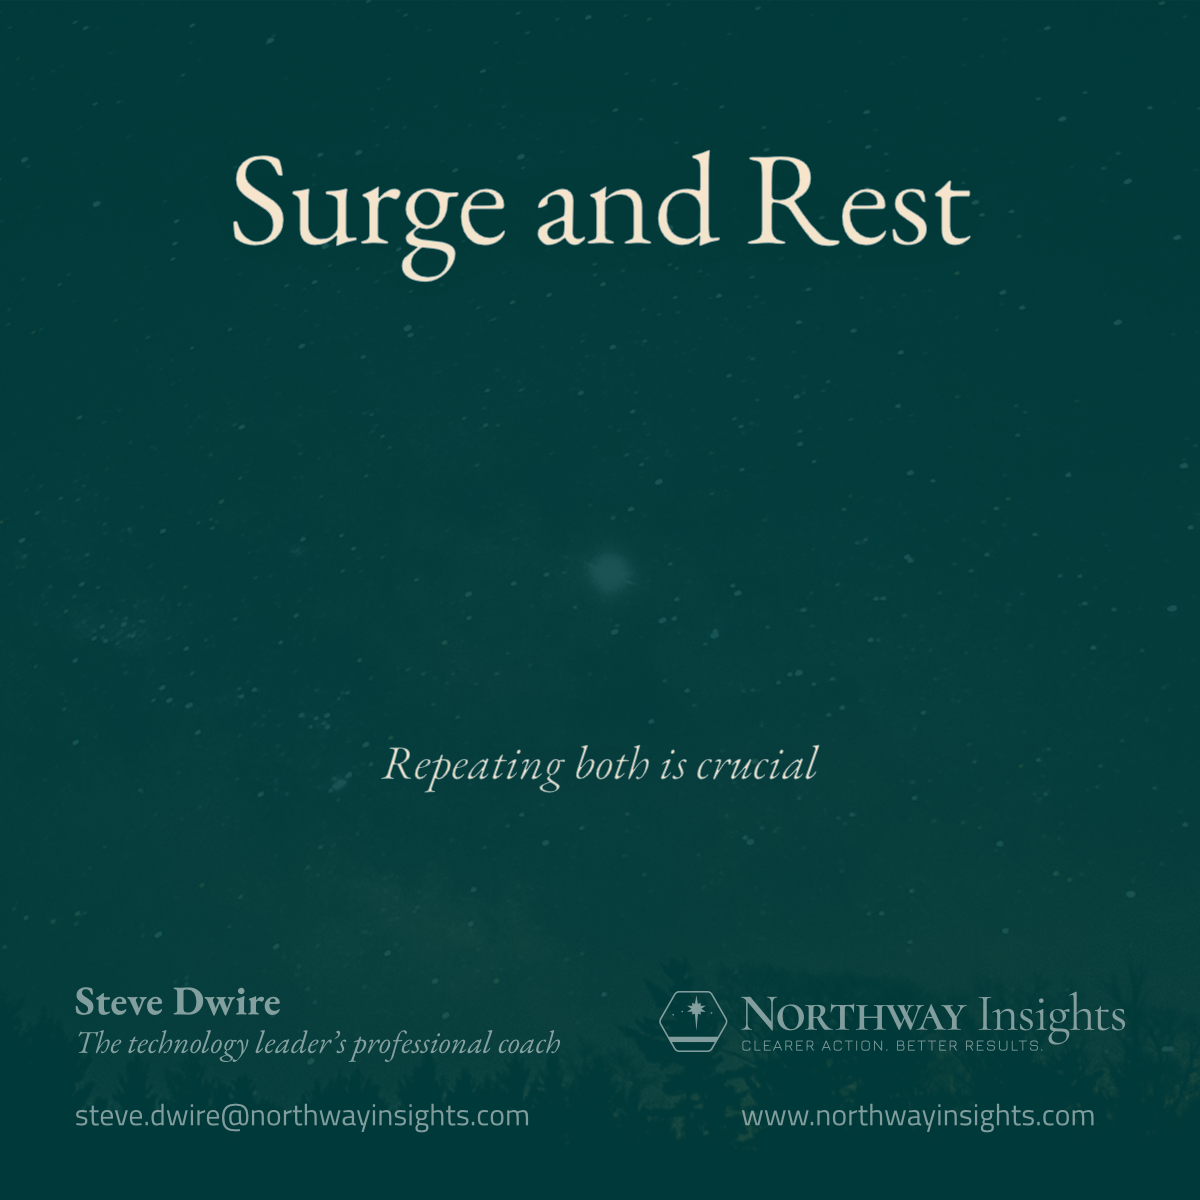 Surge and Rest (Repeating both is crucial)